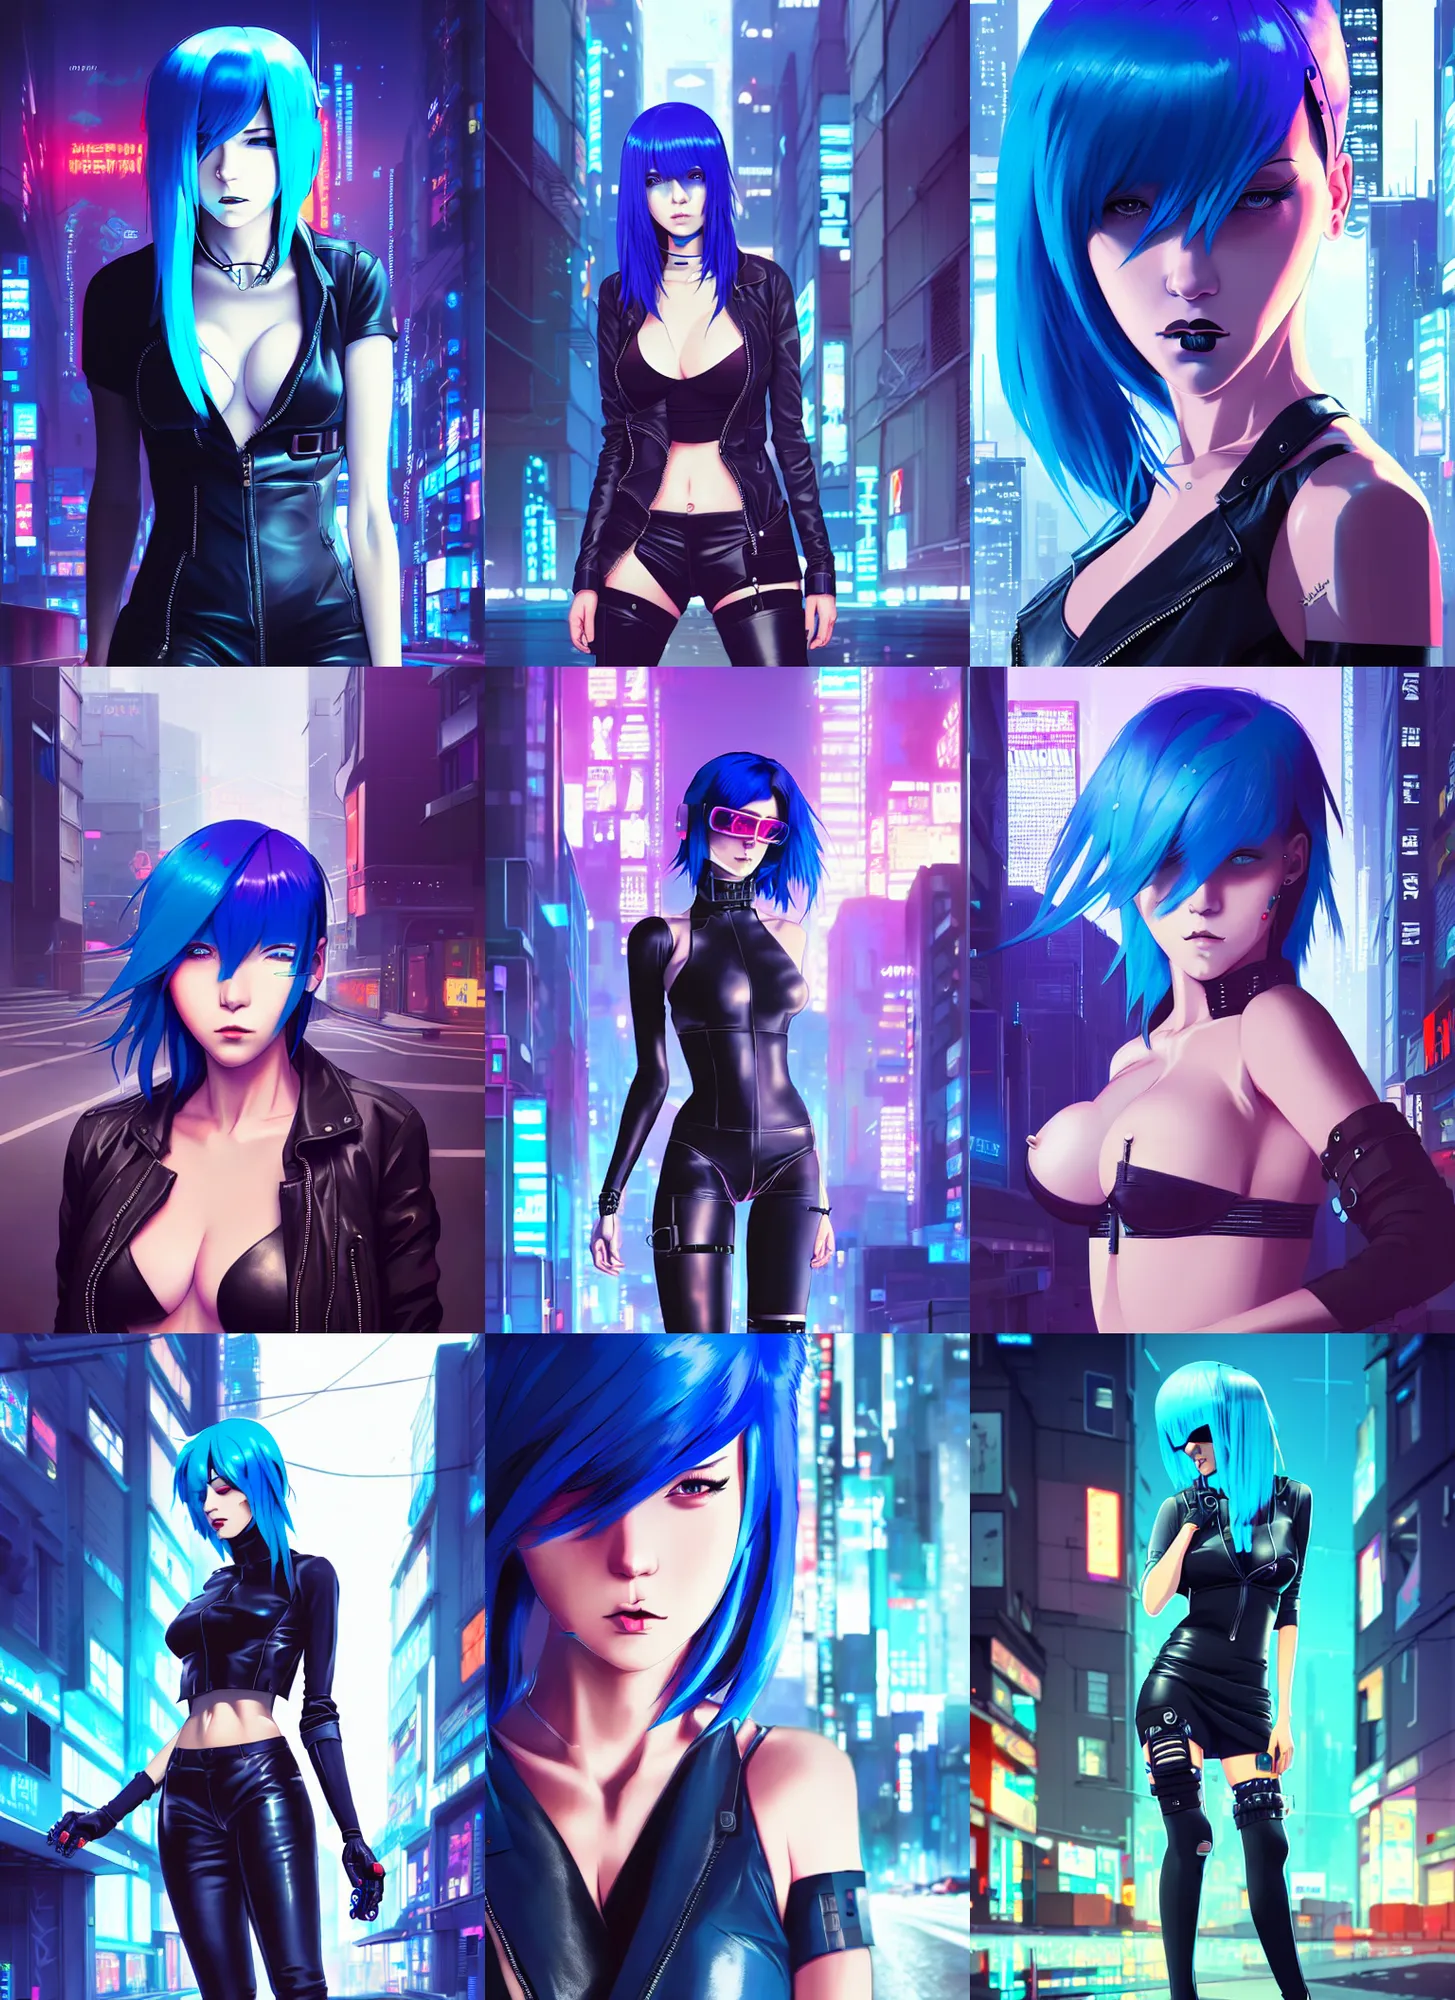 Prompt: hyper realistic photograph portrait of cyberpunk pretty girl with blue hair, wearing a sexy leather outfit, cyber implants, in city street at night, by makoto shinkai, ilya kuvshinov, lois van baarle, rossdraws, basquiat